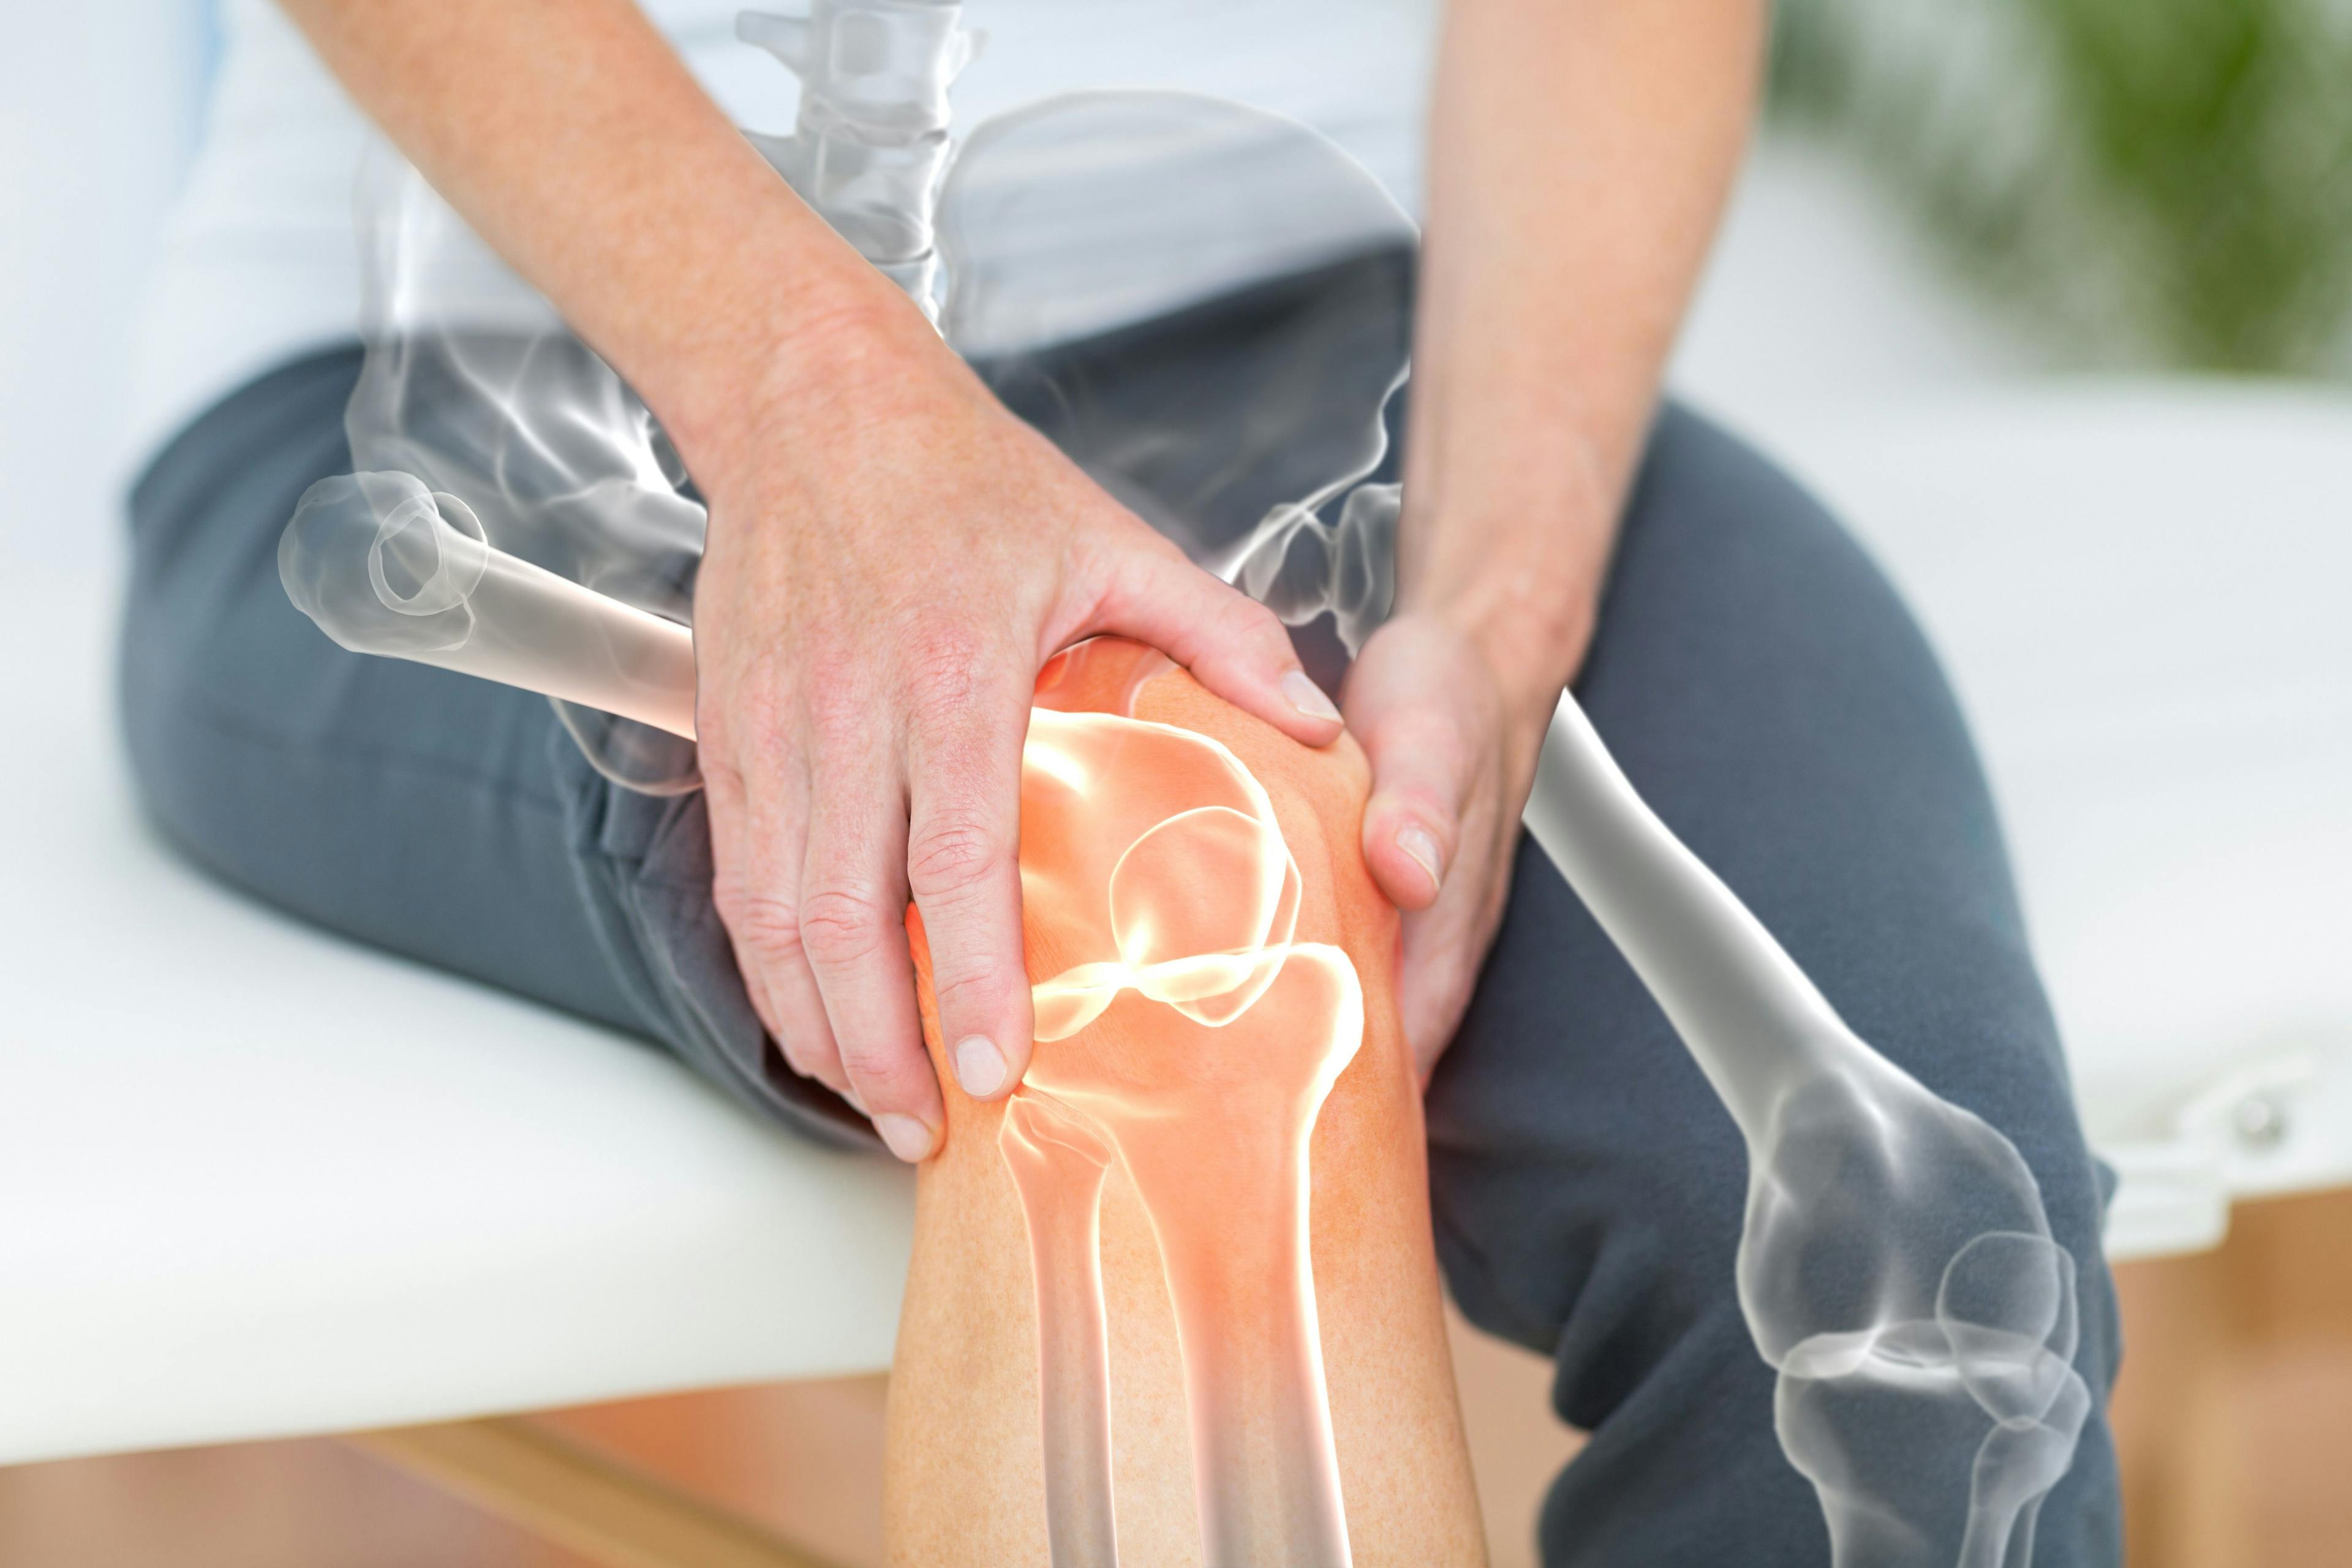 Joint, Musculoskeletal Pain Ranked Most Vexing Symptom in Patients With PsA